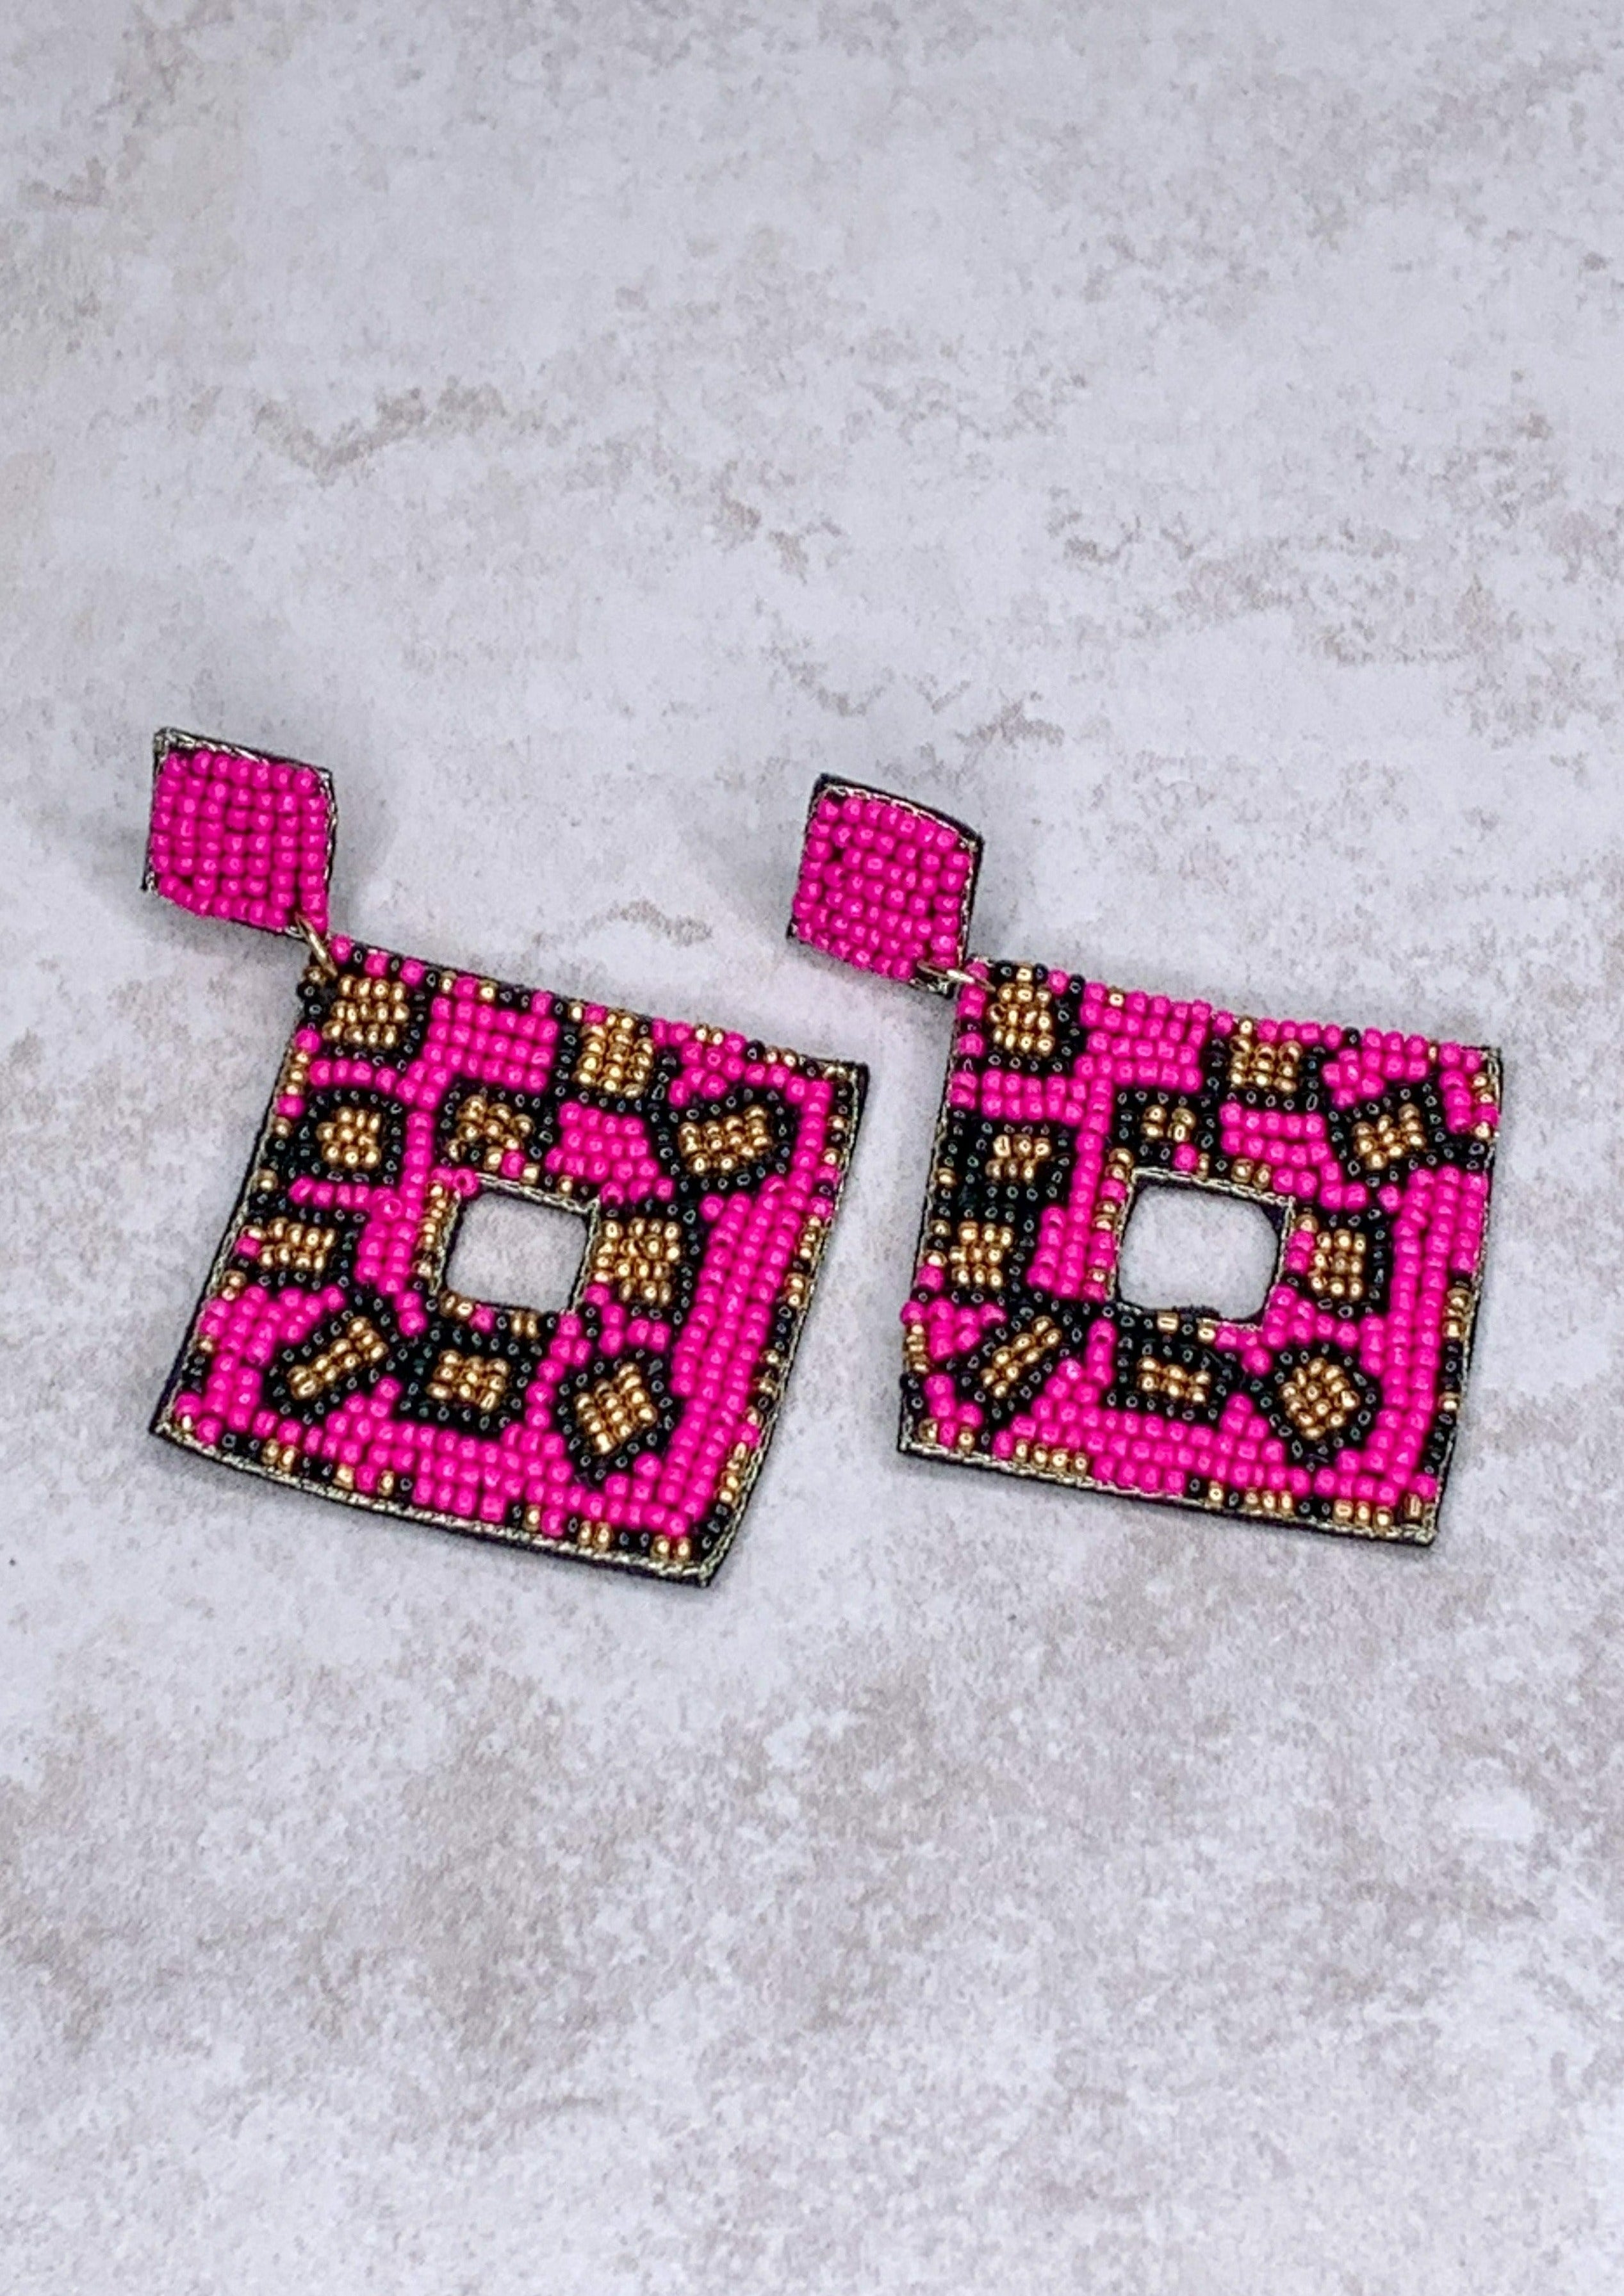 Hot Pink and Leopard Seed Bead Earrings